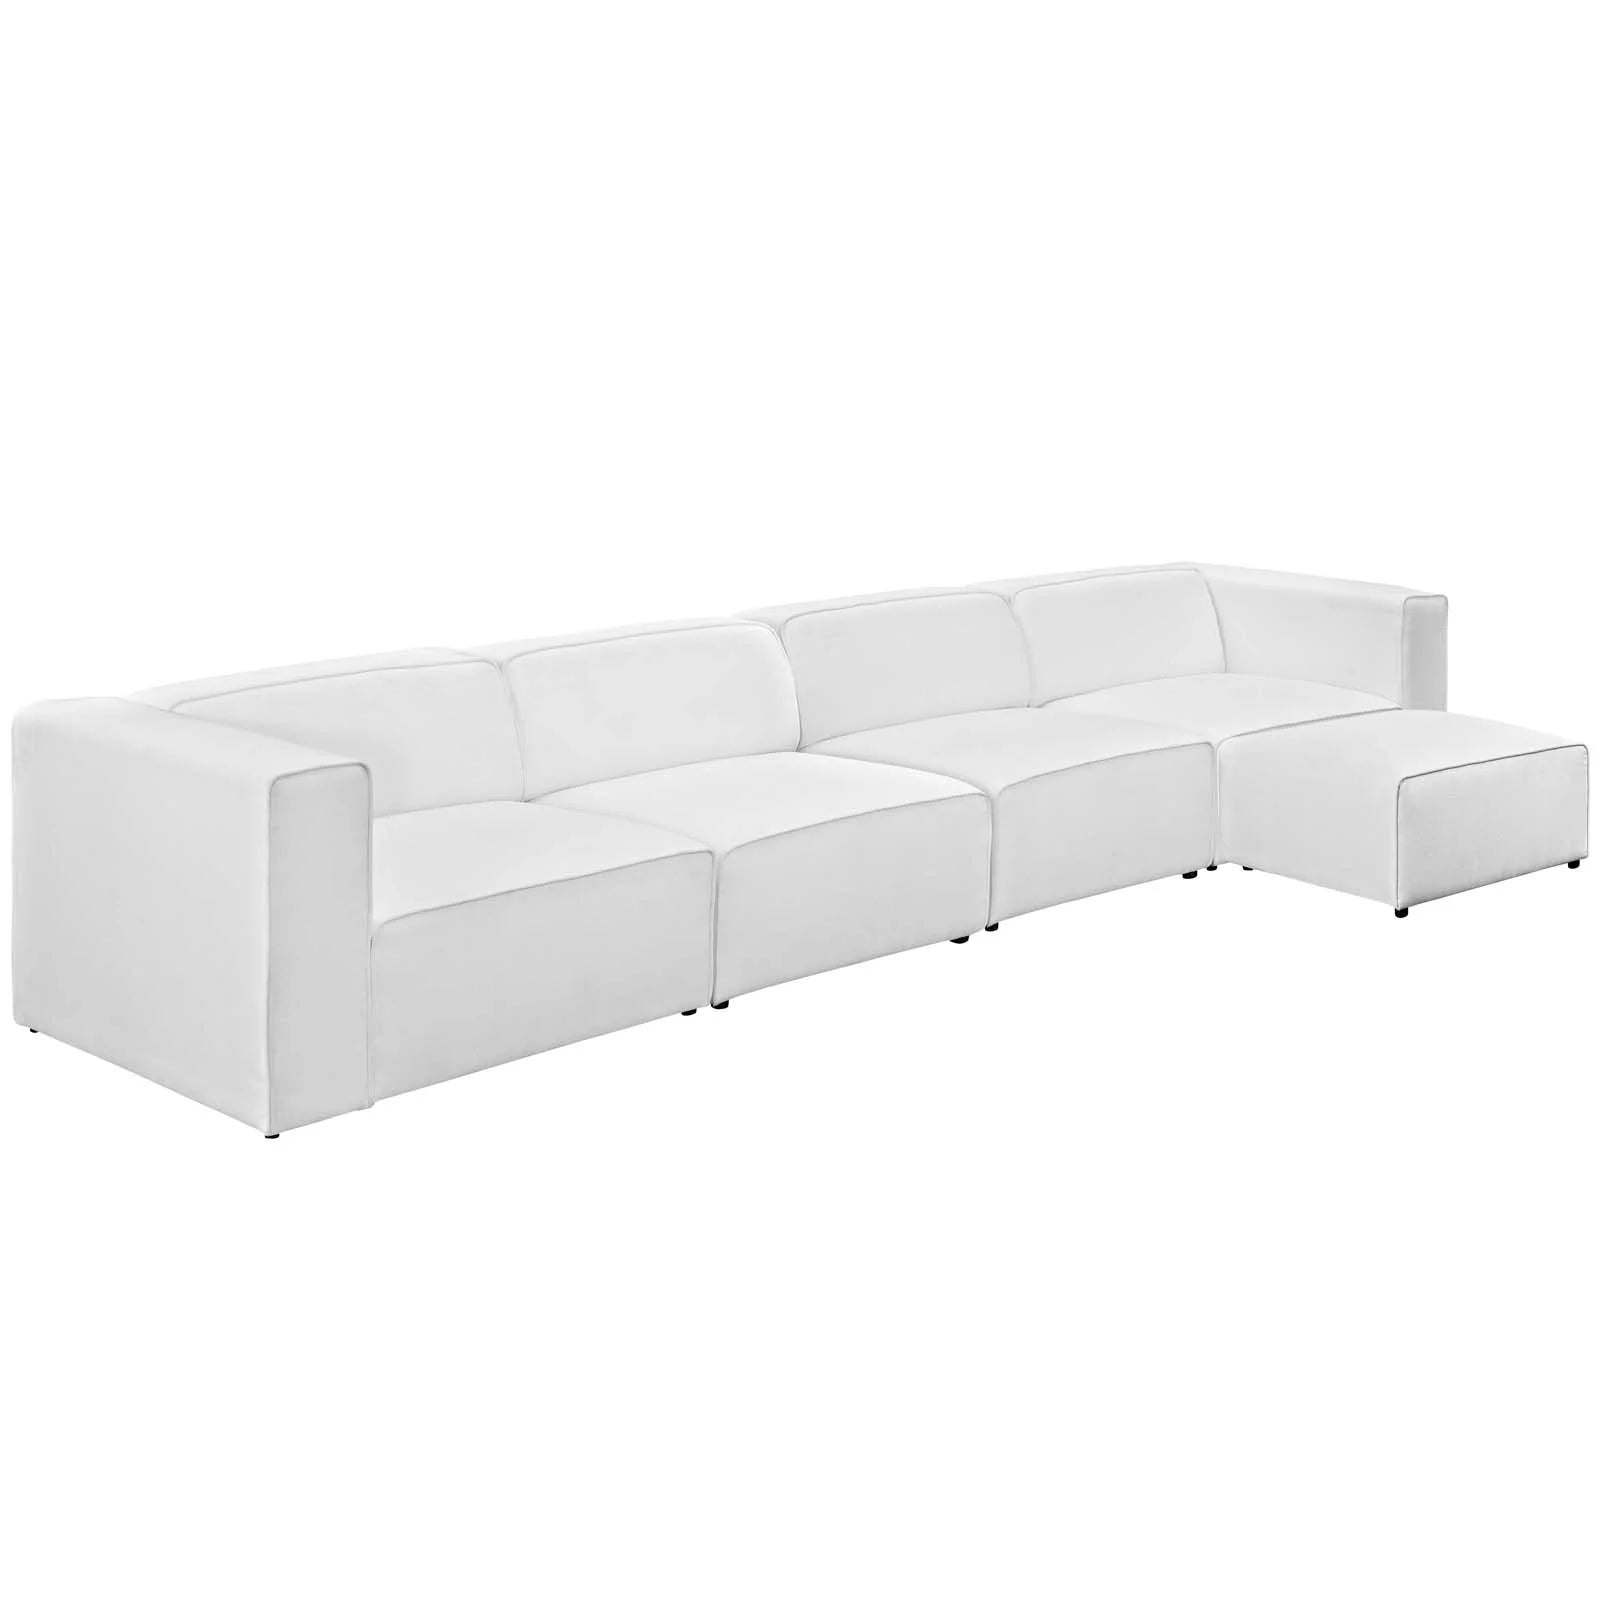 VENICE 5 PIECE EXTENDED SECTIONAL